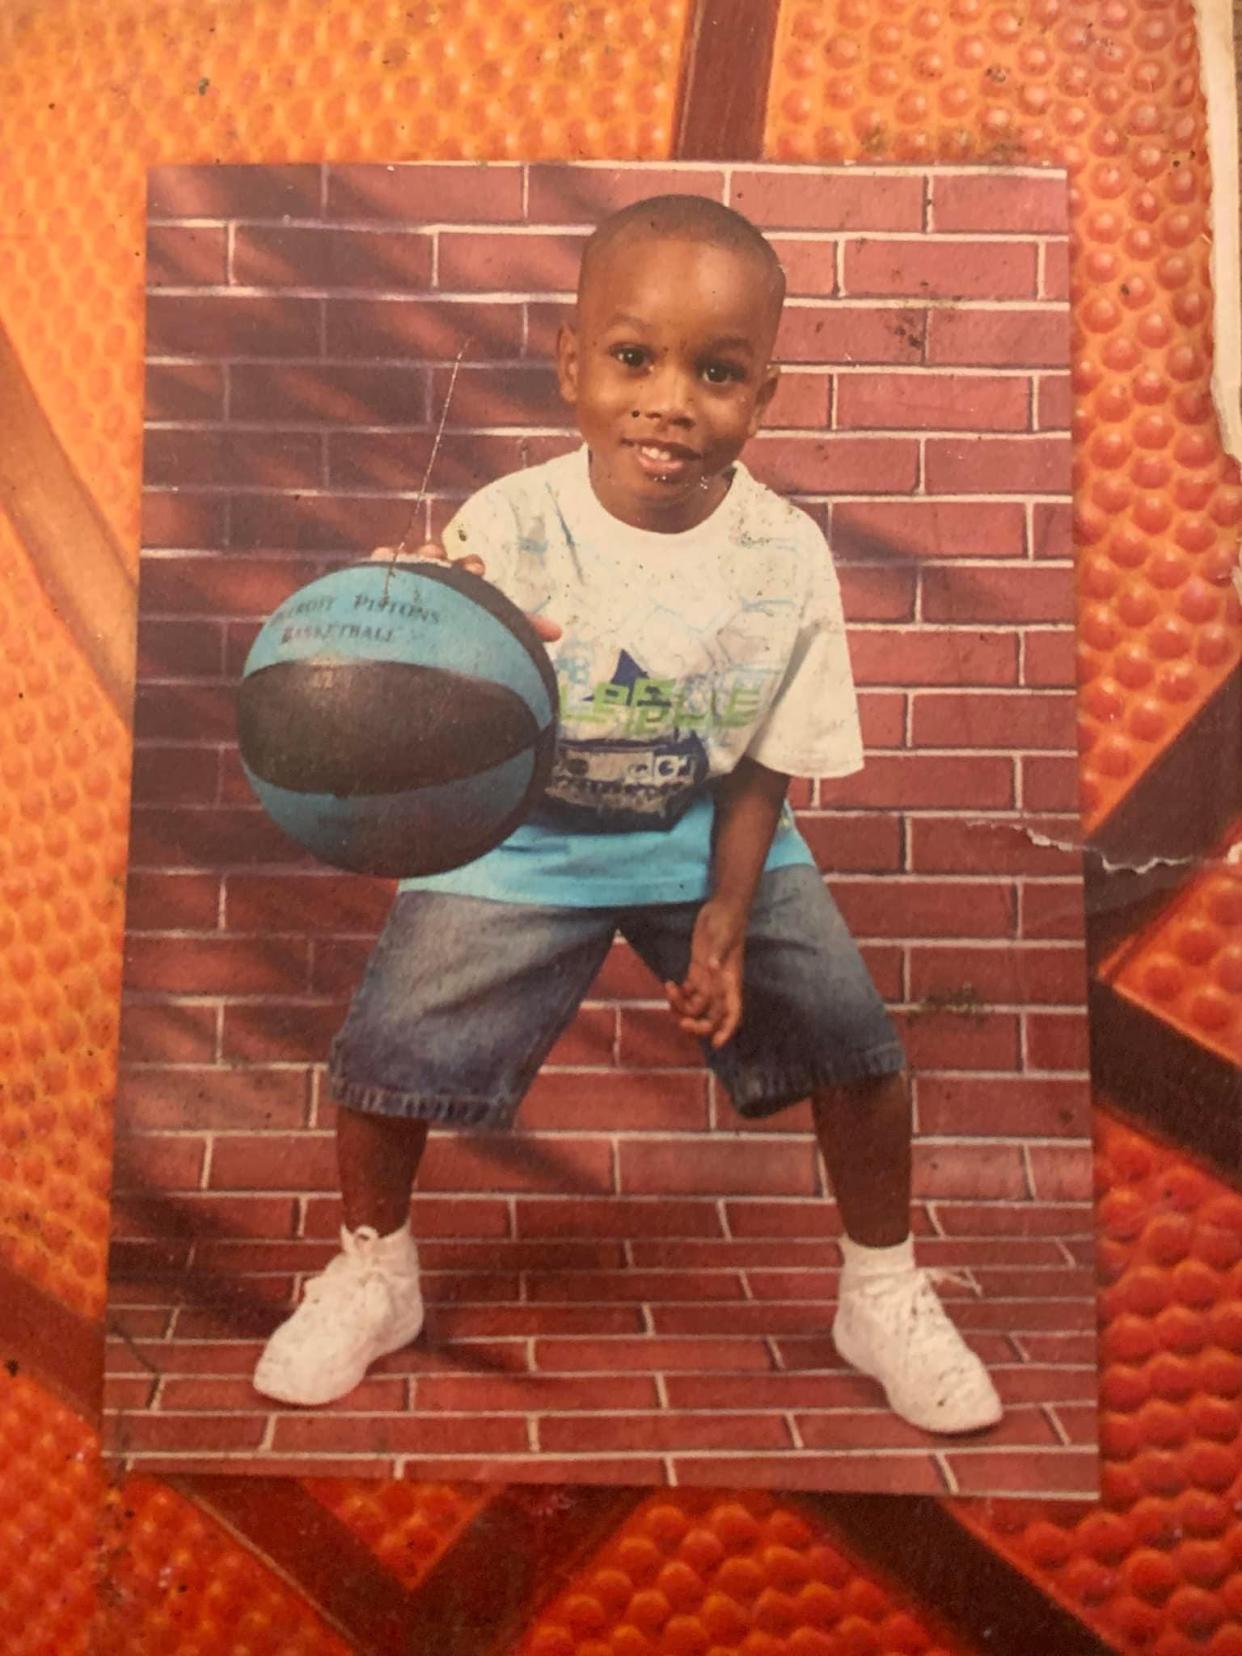 Terrance Coker Jr. loved sports from a young age. He was killed at age 18.